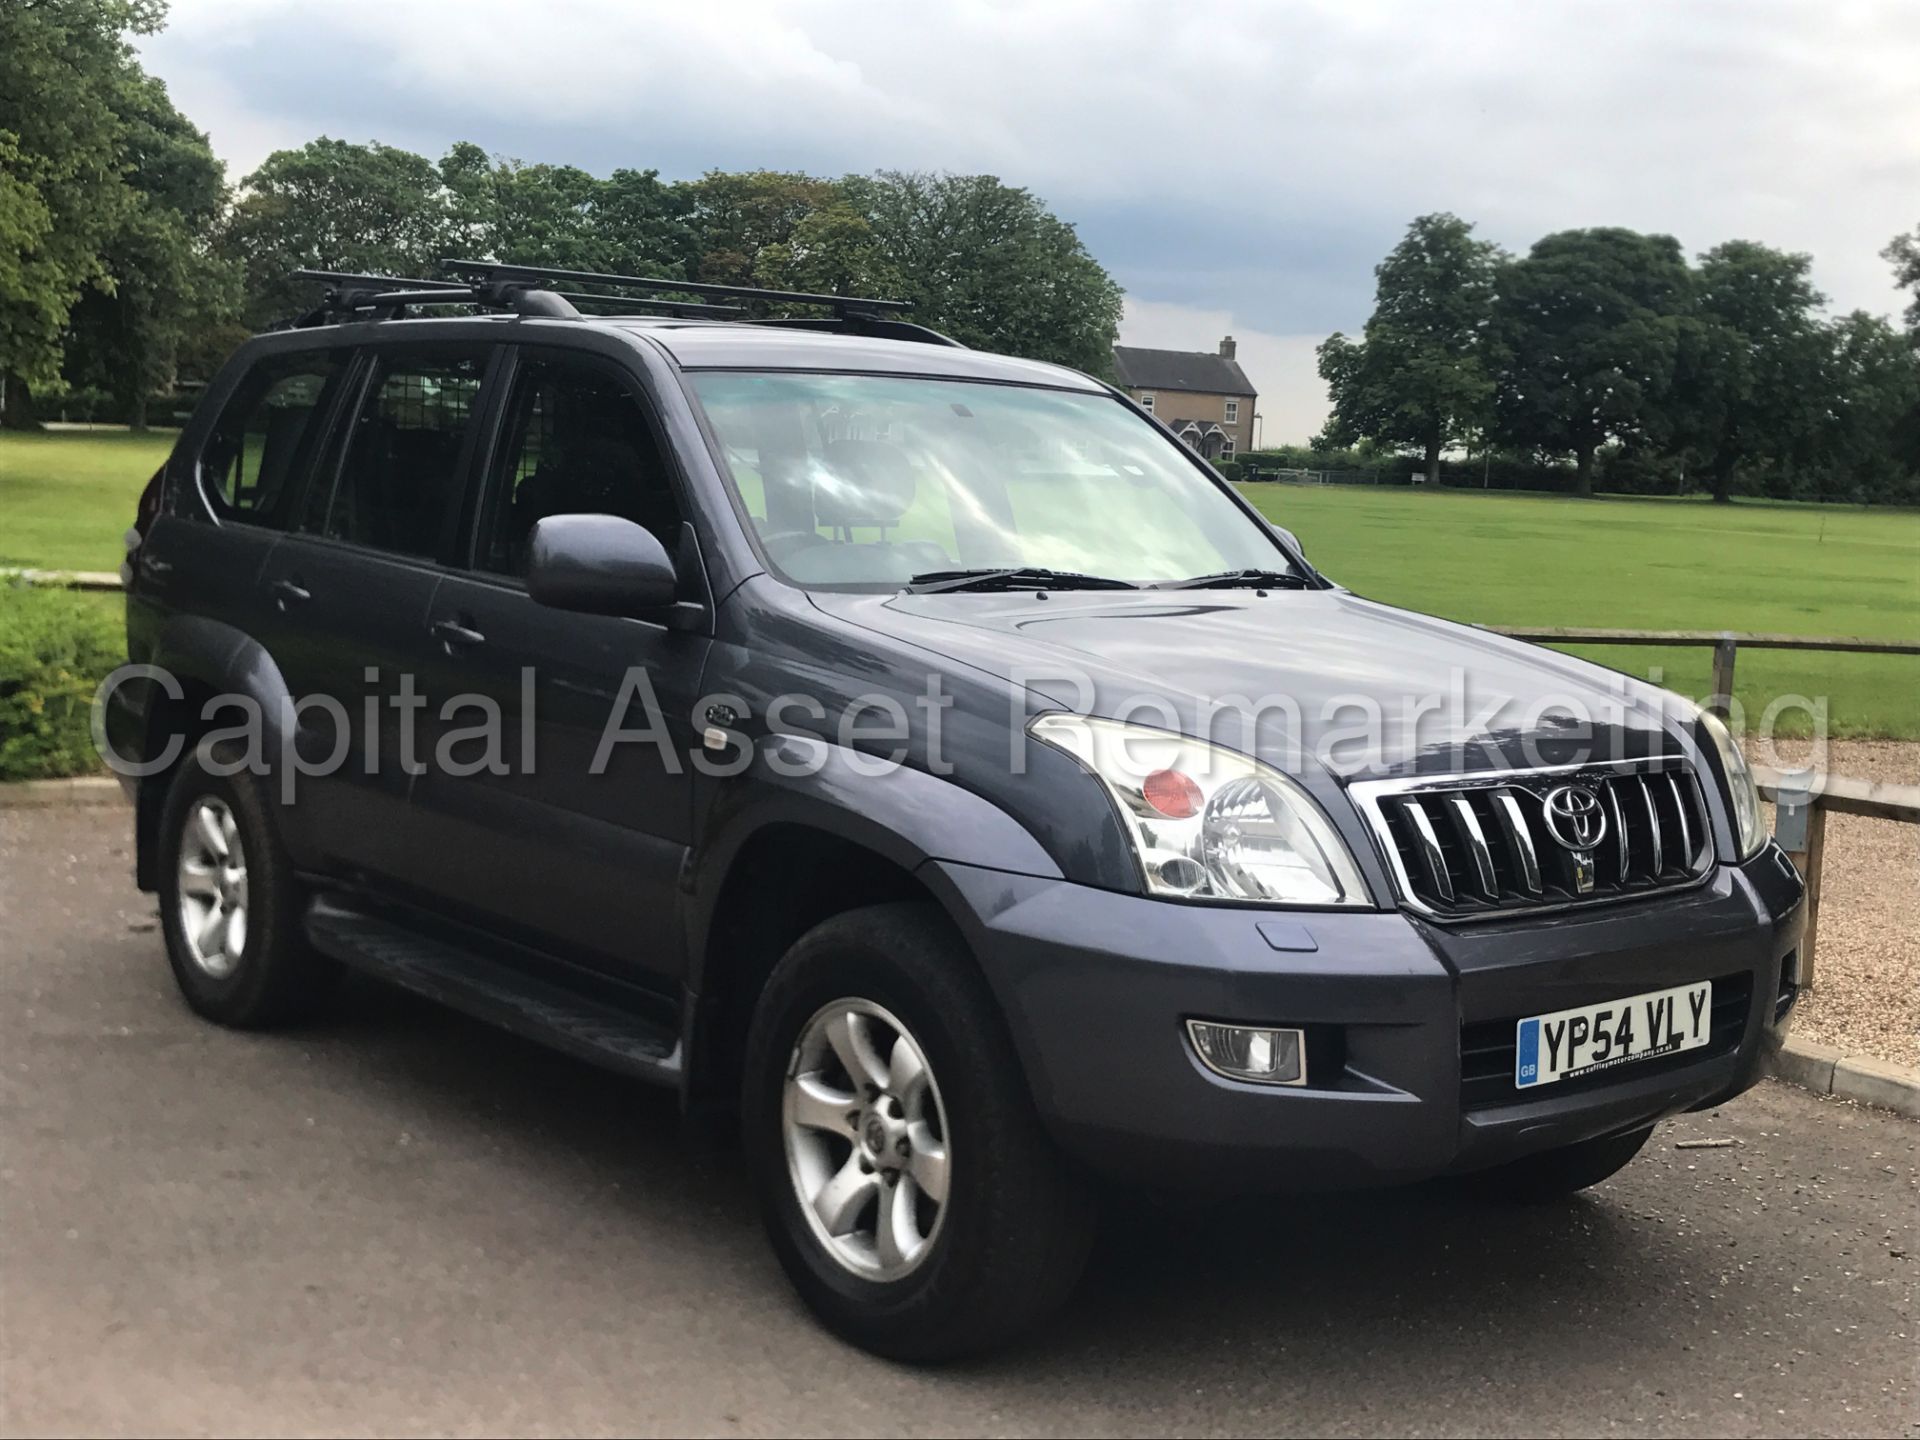 TOYOTA LAND CRUISER 'LC4 EDITION' (2005 MODEL) '3.0 D-4D - AUTO - LEATHER - 7 SEATER' *MASSIVE SPEC*